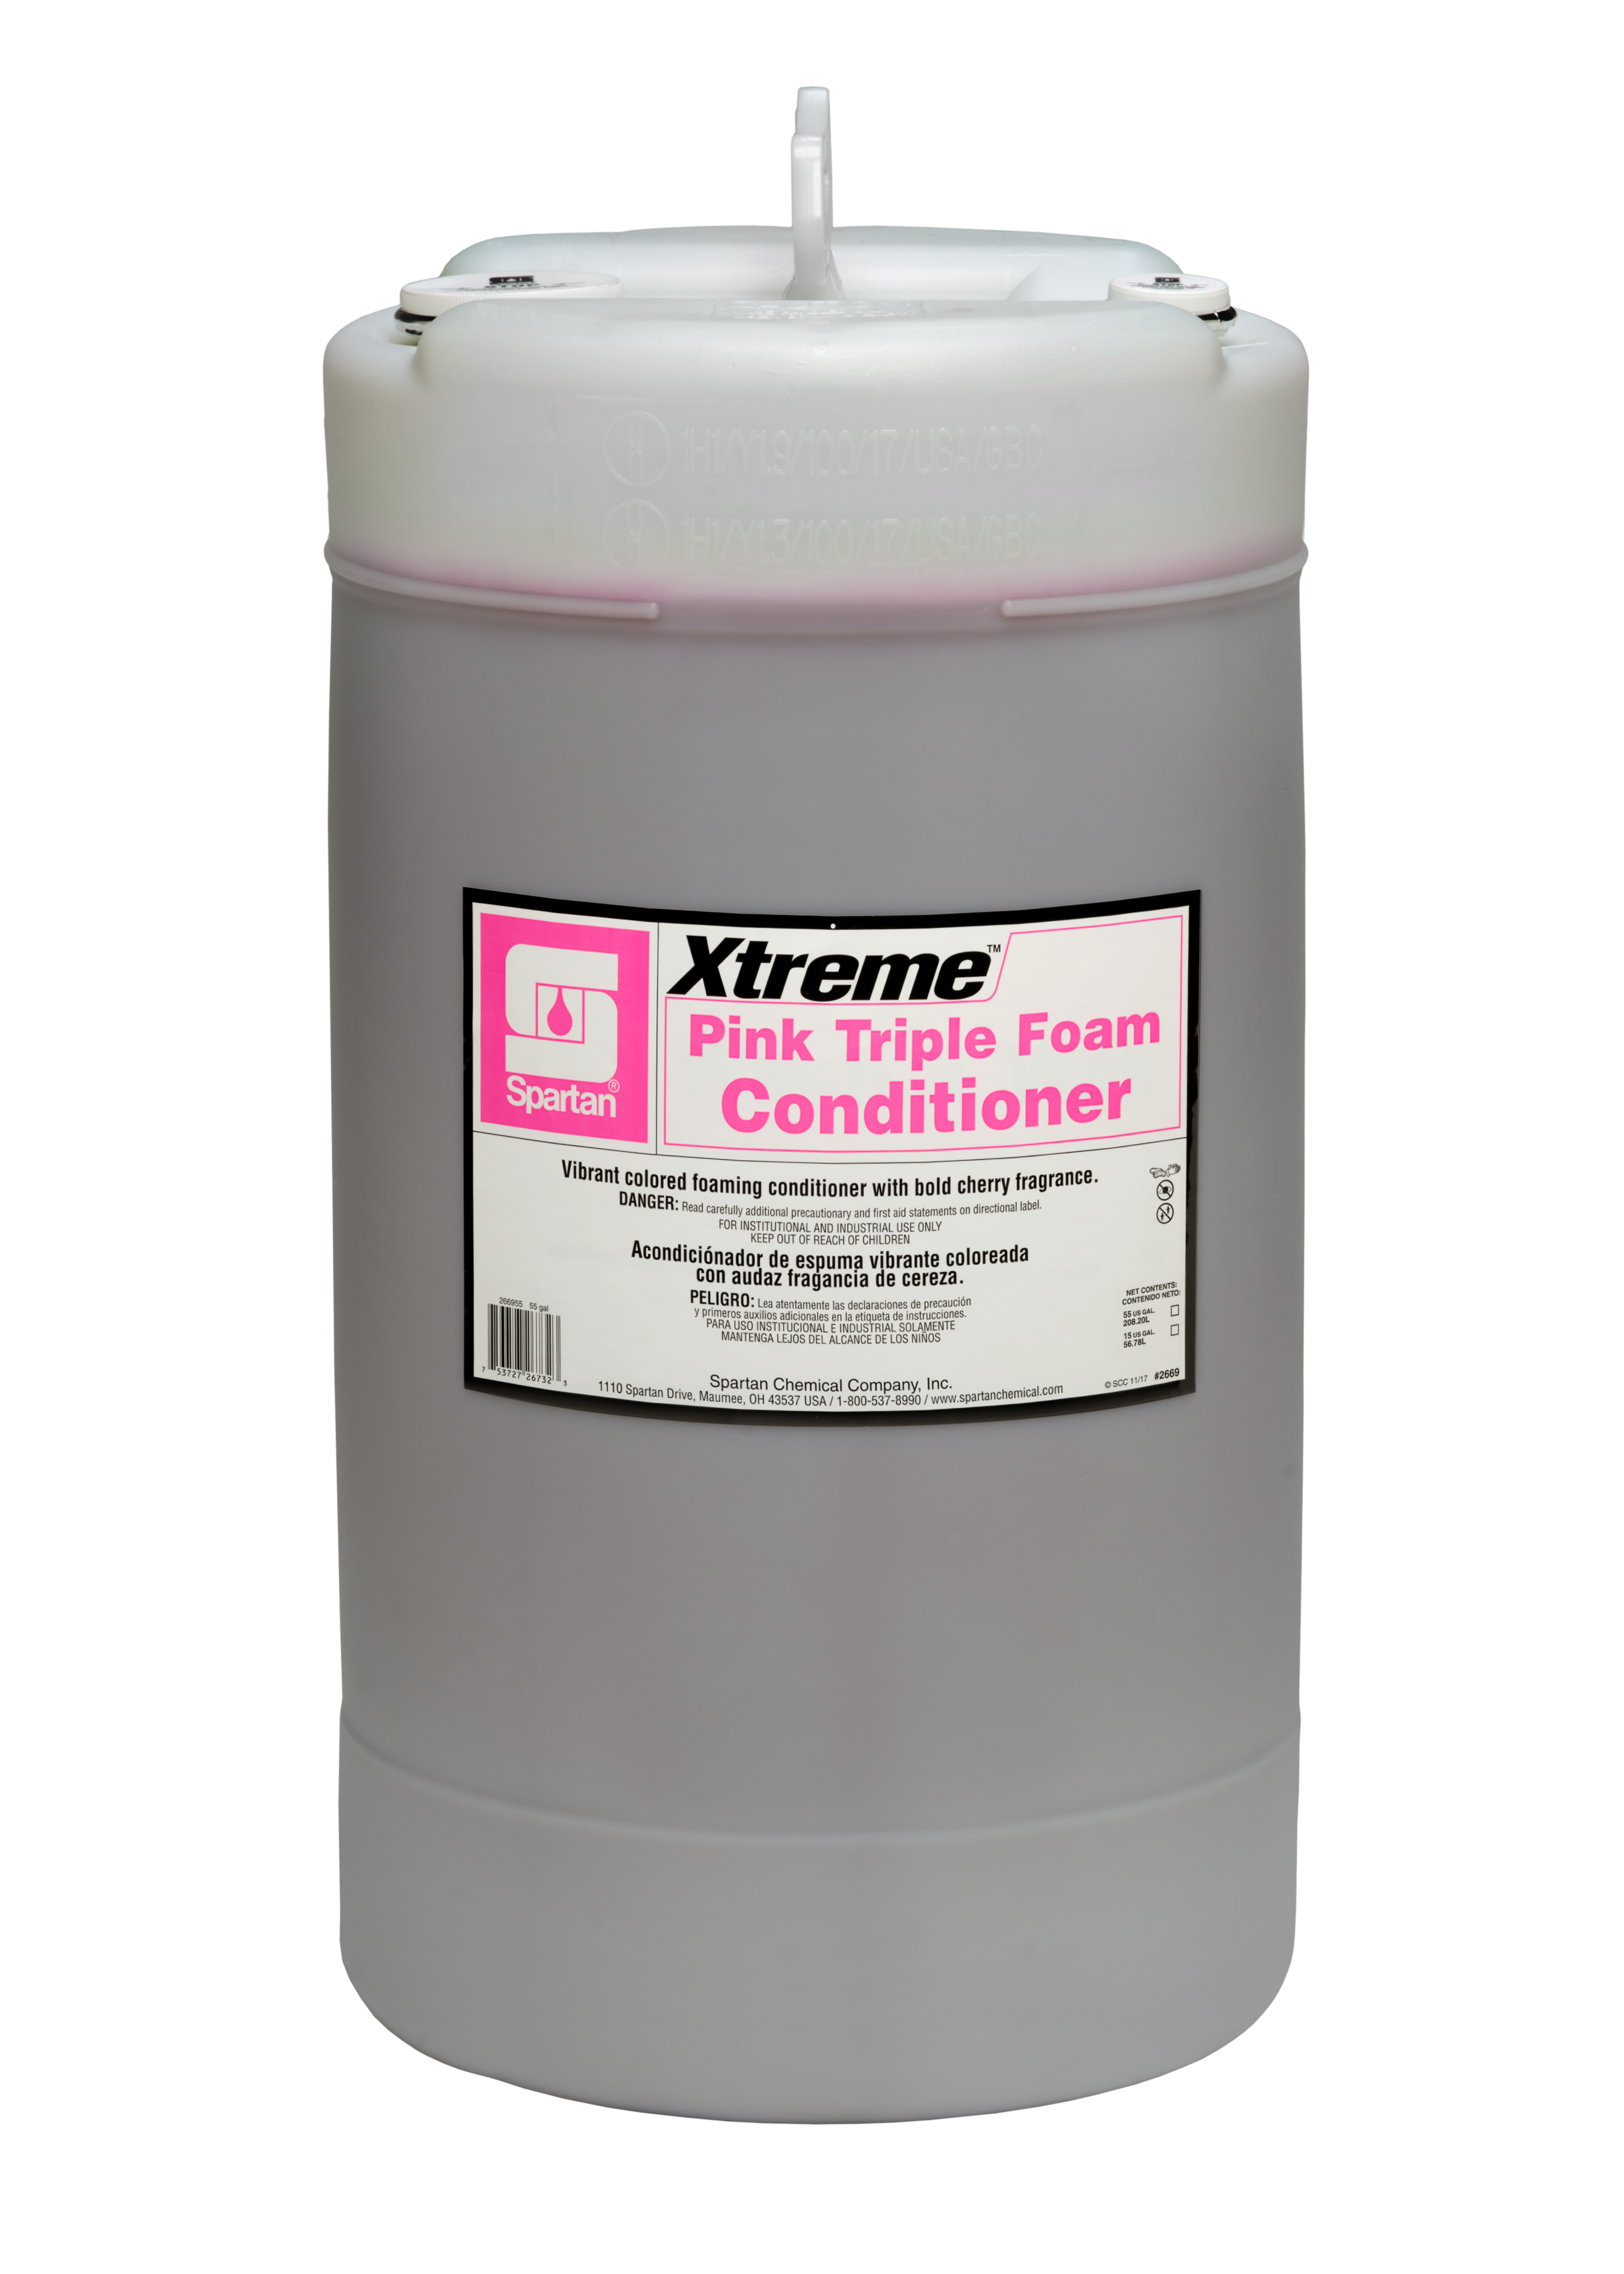 Spartan Chemical Company Xtreme Pink Triple Foam Conditioner, 15 GAL DRUM